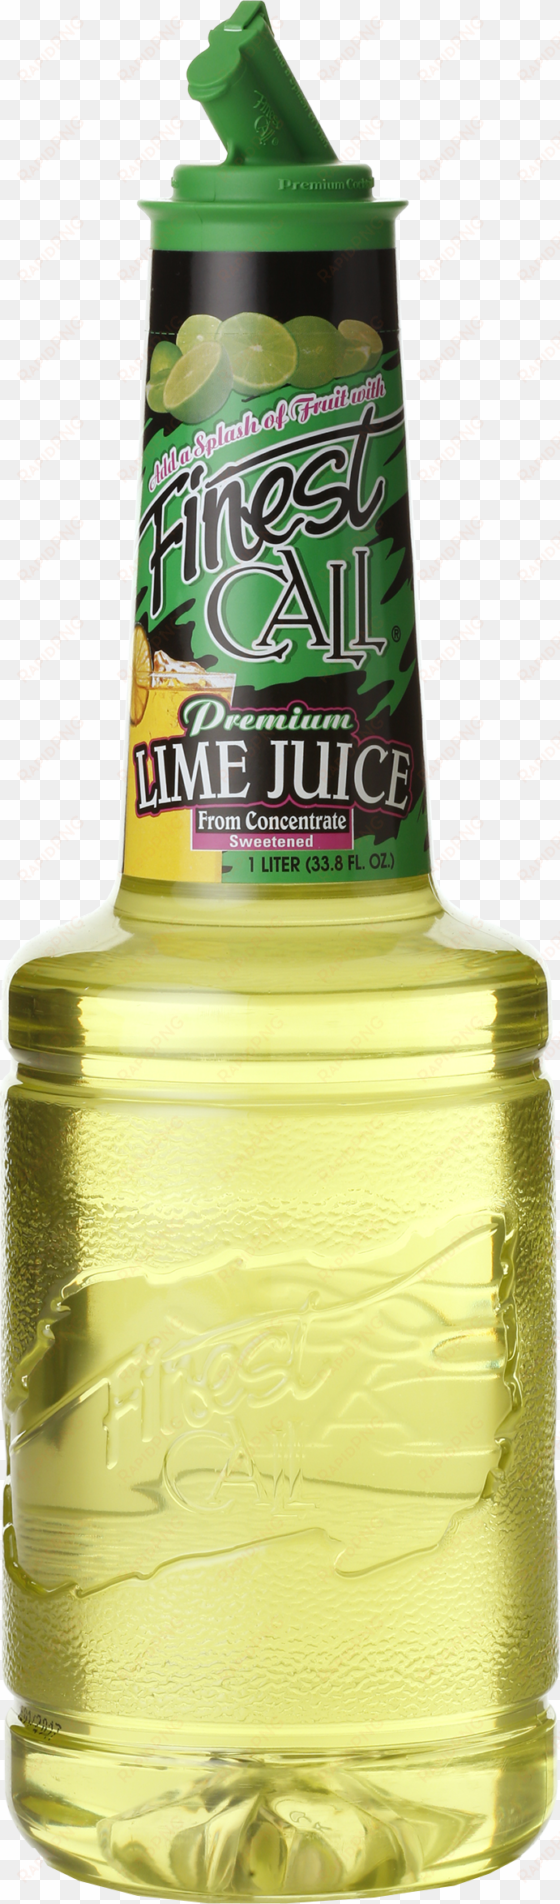 check out other recipes using - finest call premium lime juice drink mix, 1 liter bottle